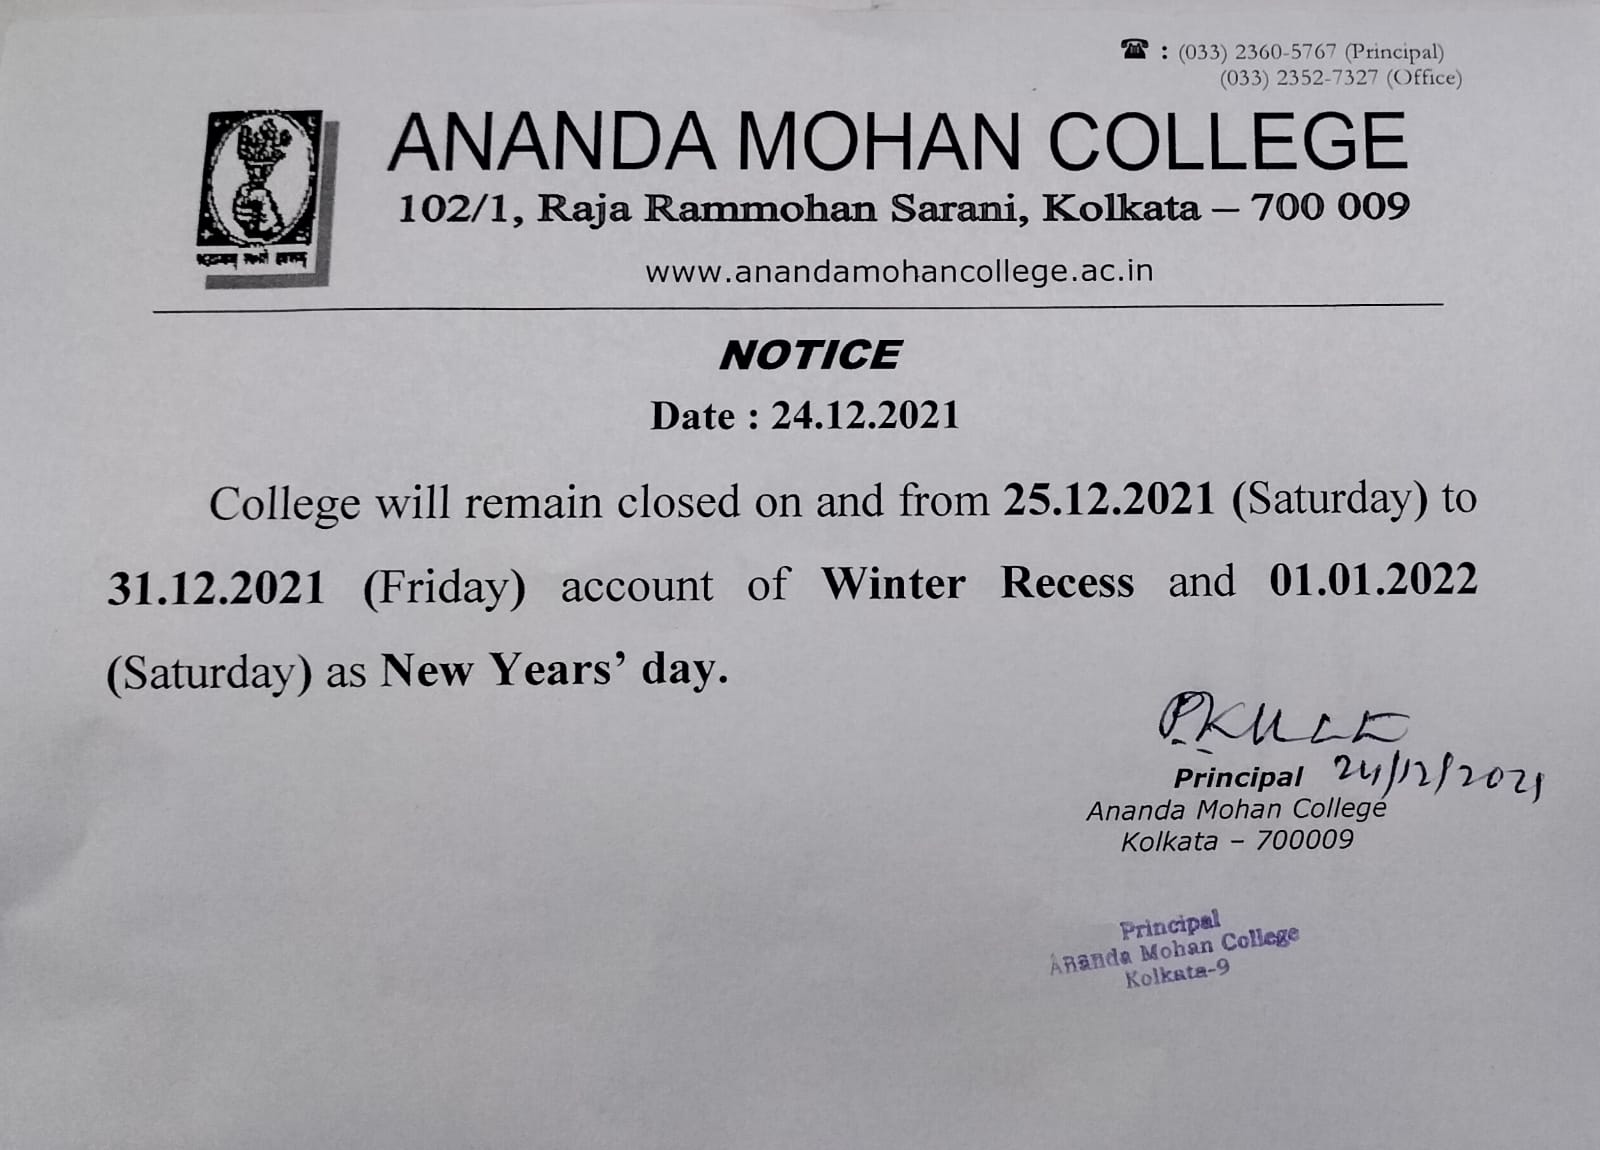 College will remain closed from 25/12/2021 to 01/01/2022 - Ananda Mohan  College